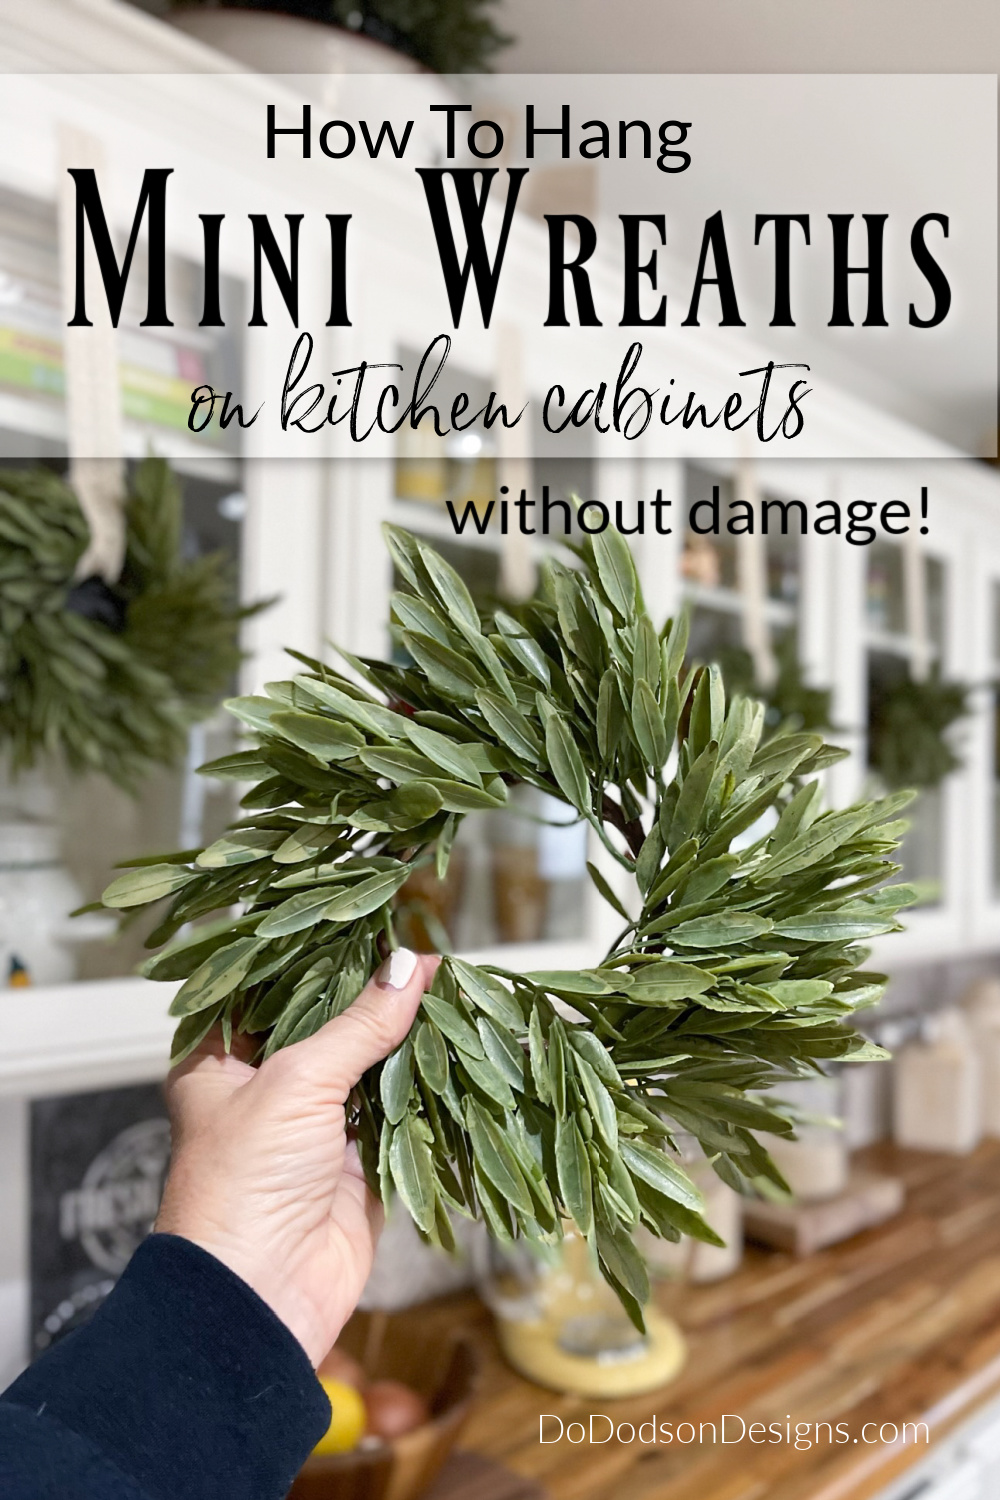 The Best Way To Hang Mini Wreaths On Kitchen Cabinets